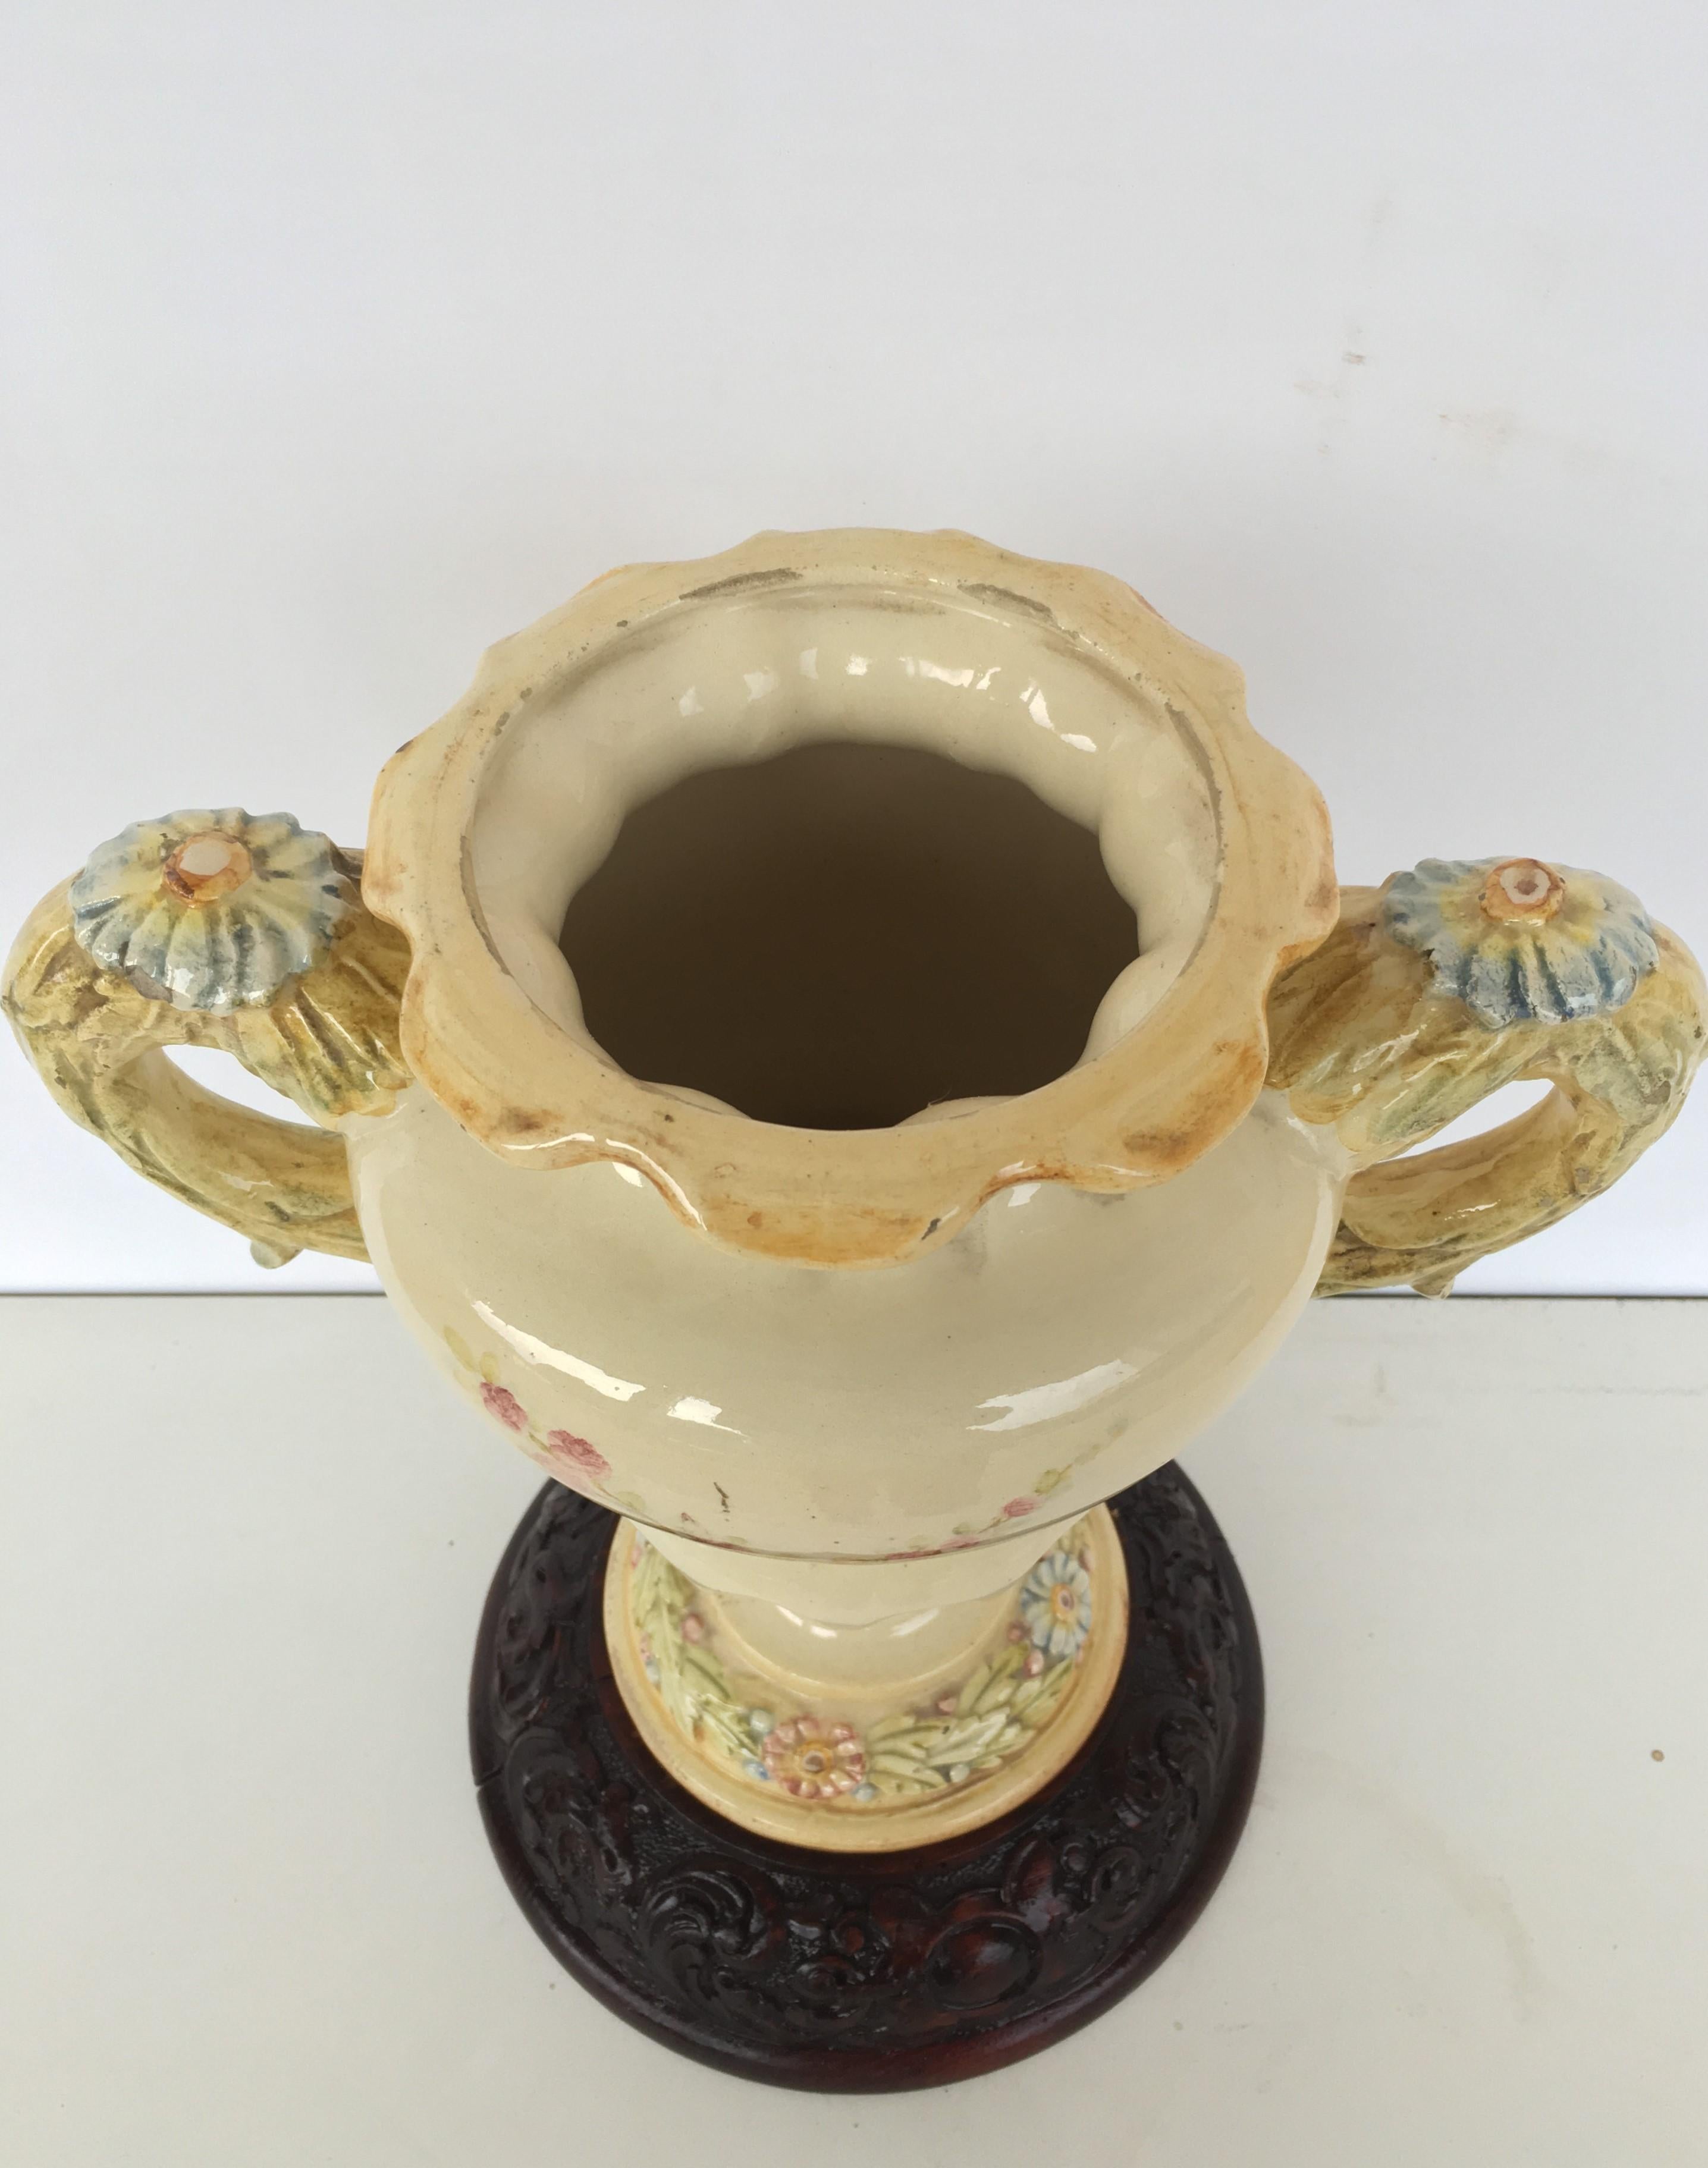 19th Spanish ceramic floral urn with two handles and carved wood base

Enameled and gilded vase ceramic Peyró Antonio Valencia, circa 1950 signed and stamped 